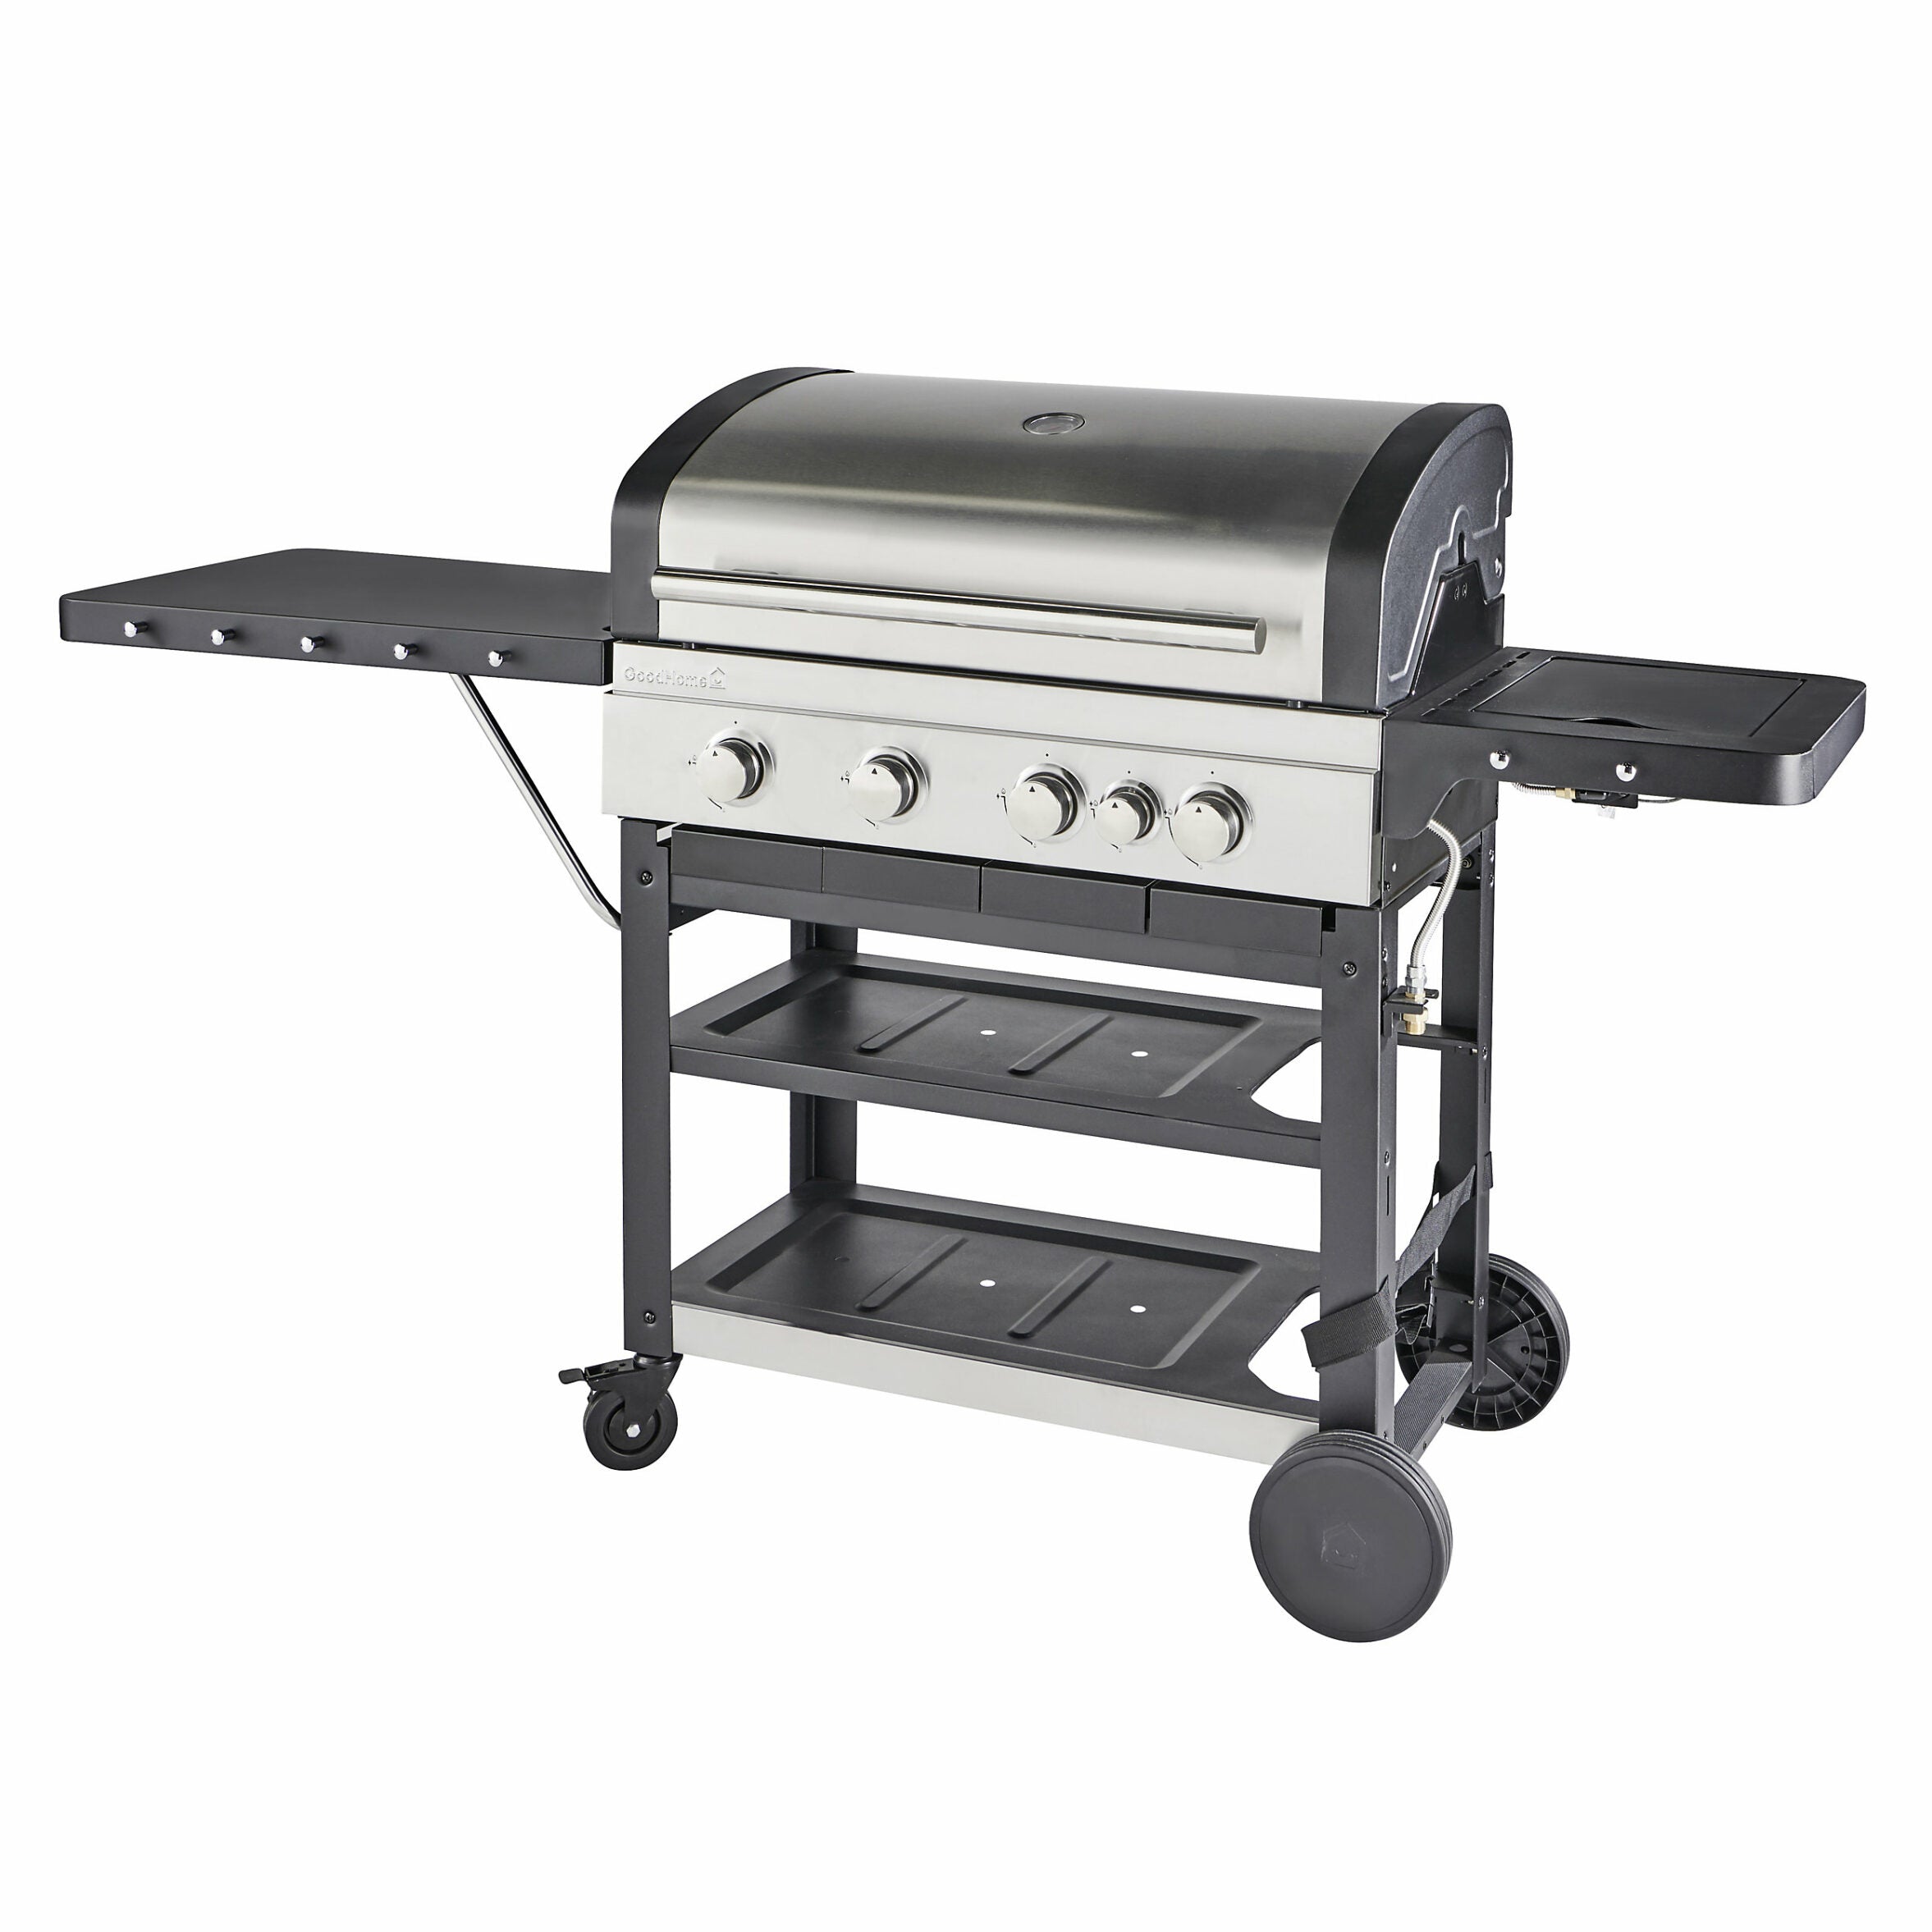 GoodHome Owsley 4.1 Black 4 burner Gas Barbecue- Cosmetic Mark 1257